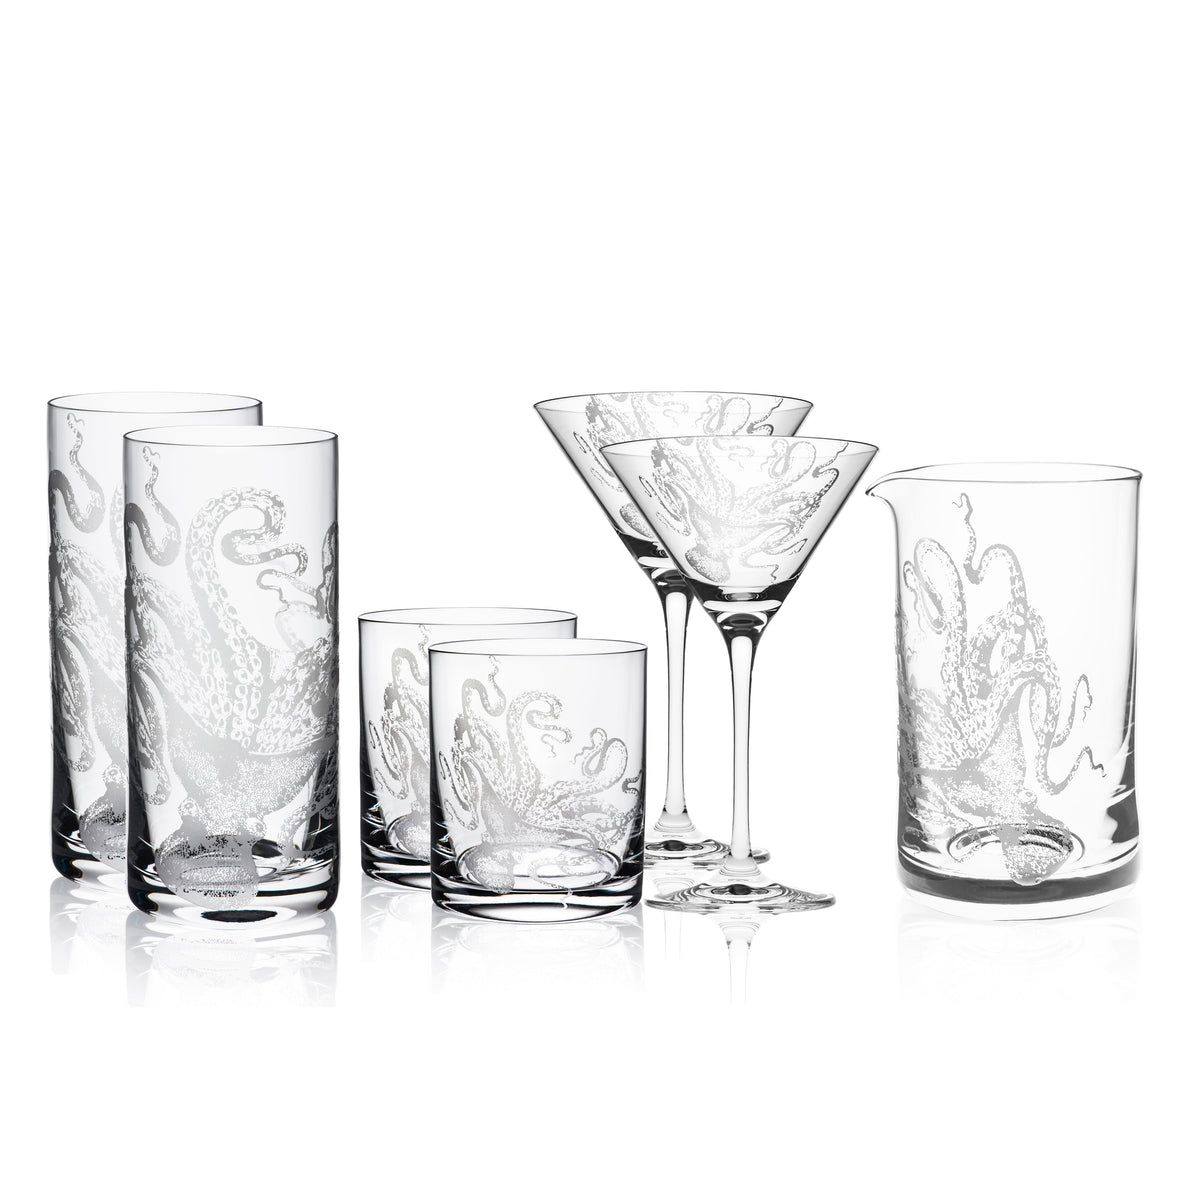 A collection of octopus glassware, including the &quot;I Love Lucy&quot; Cocktail Collection by Caskata Artisanal Home with etched octopus designs, features four highball glasses, two crystal cocktail glasses, and two tumblers, all arranged against a white background.